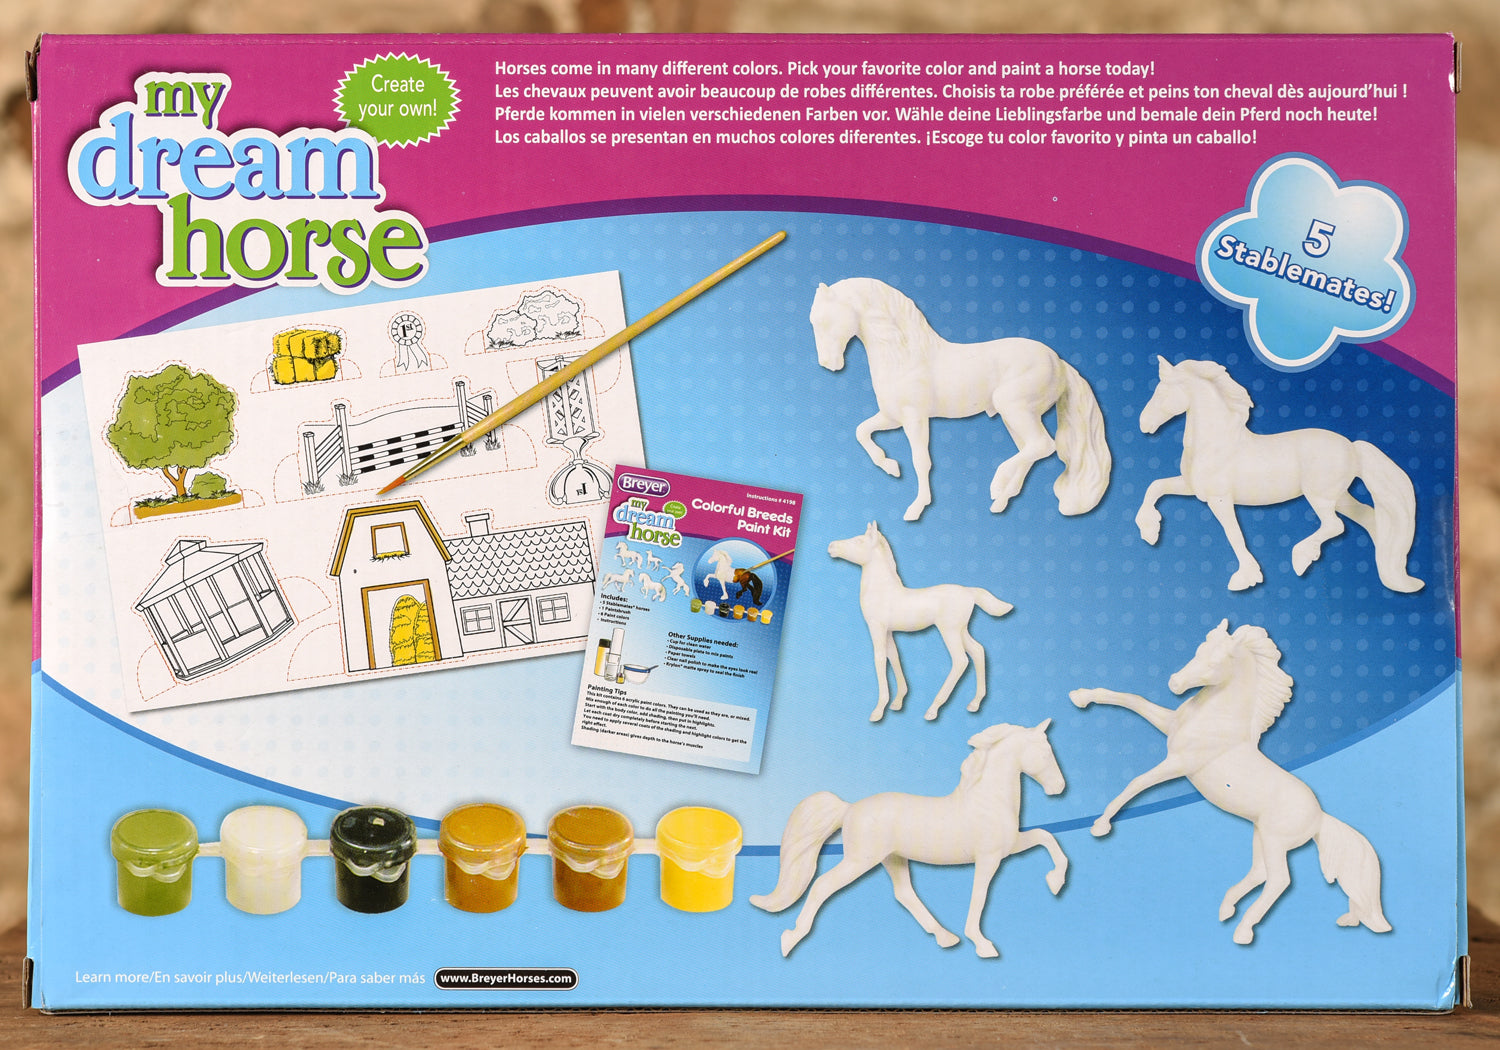 Stablemates - Paint Your Own Horse - Colorful Breeds Kit (retired